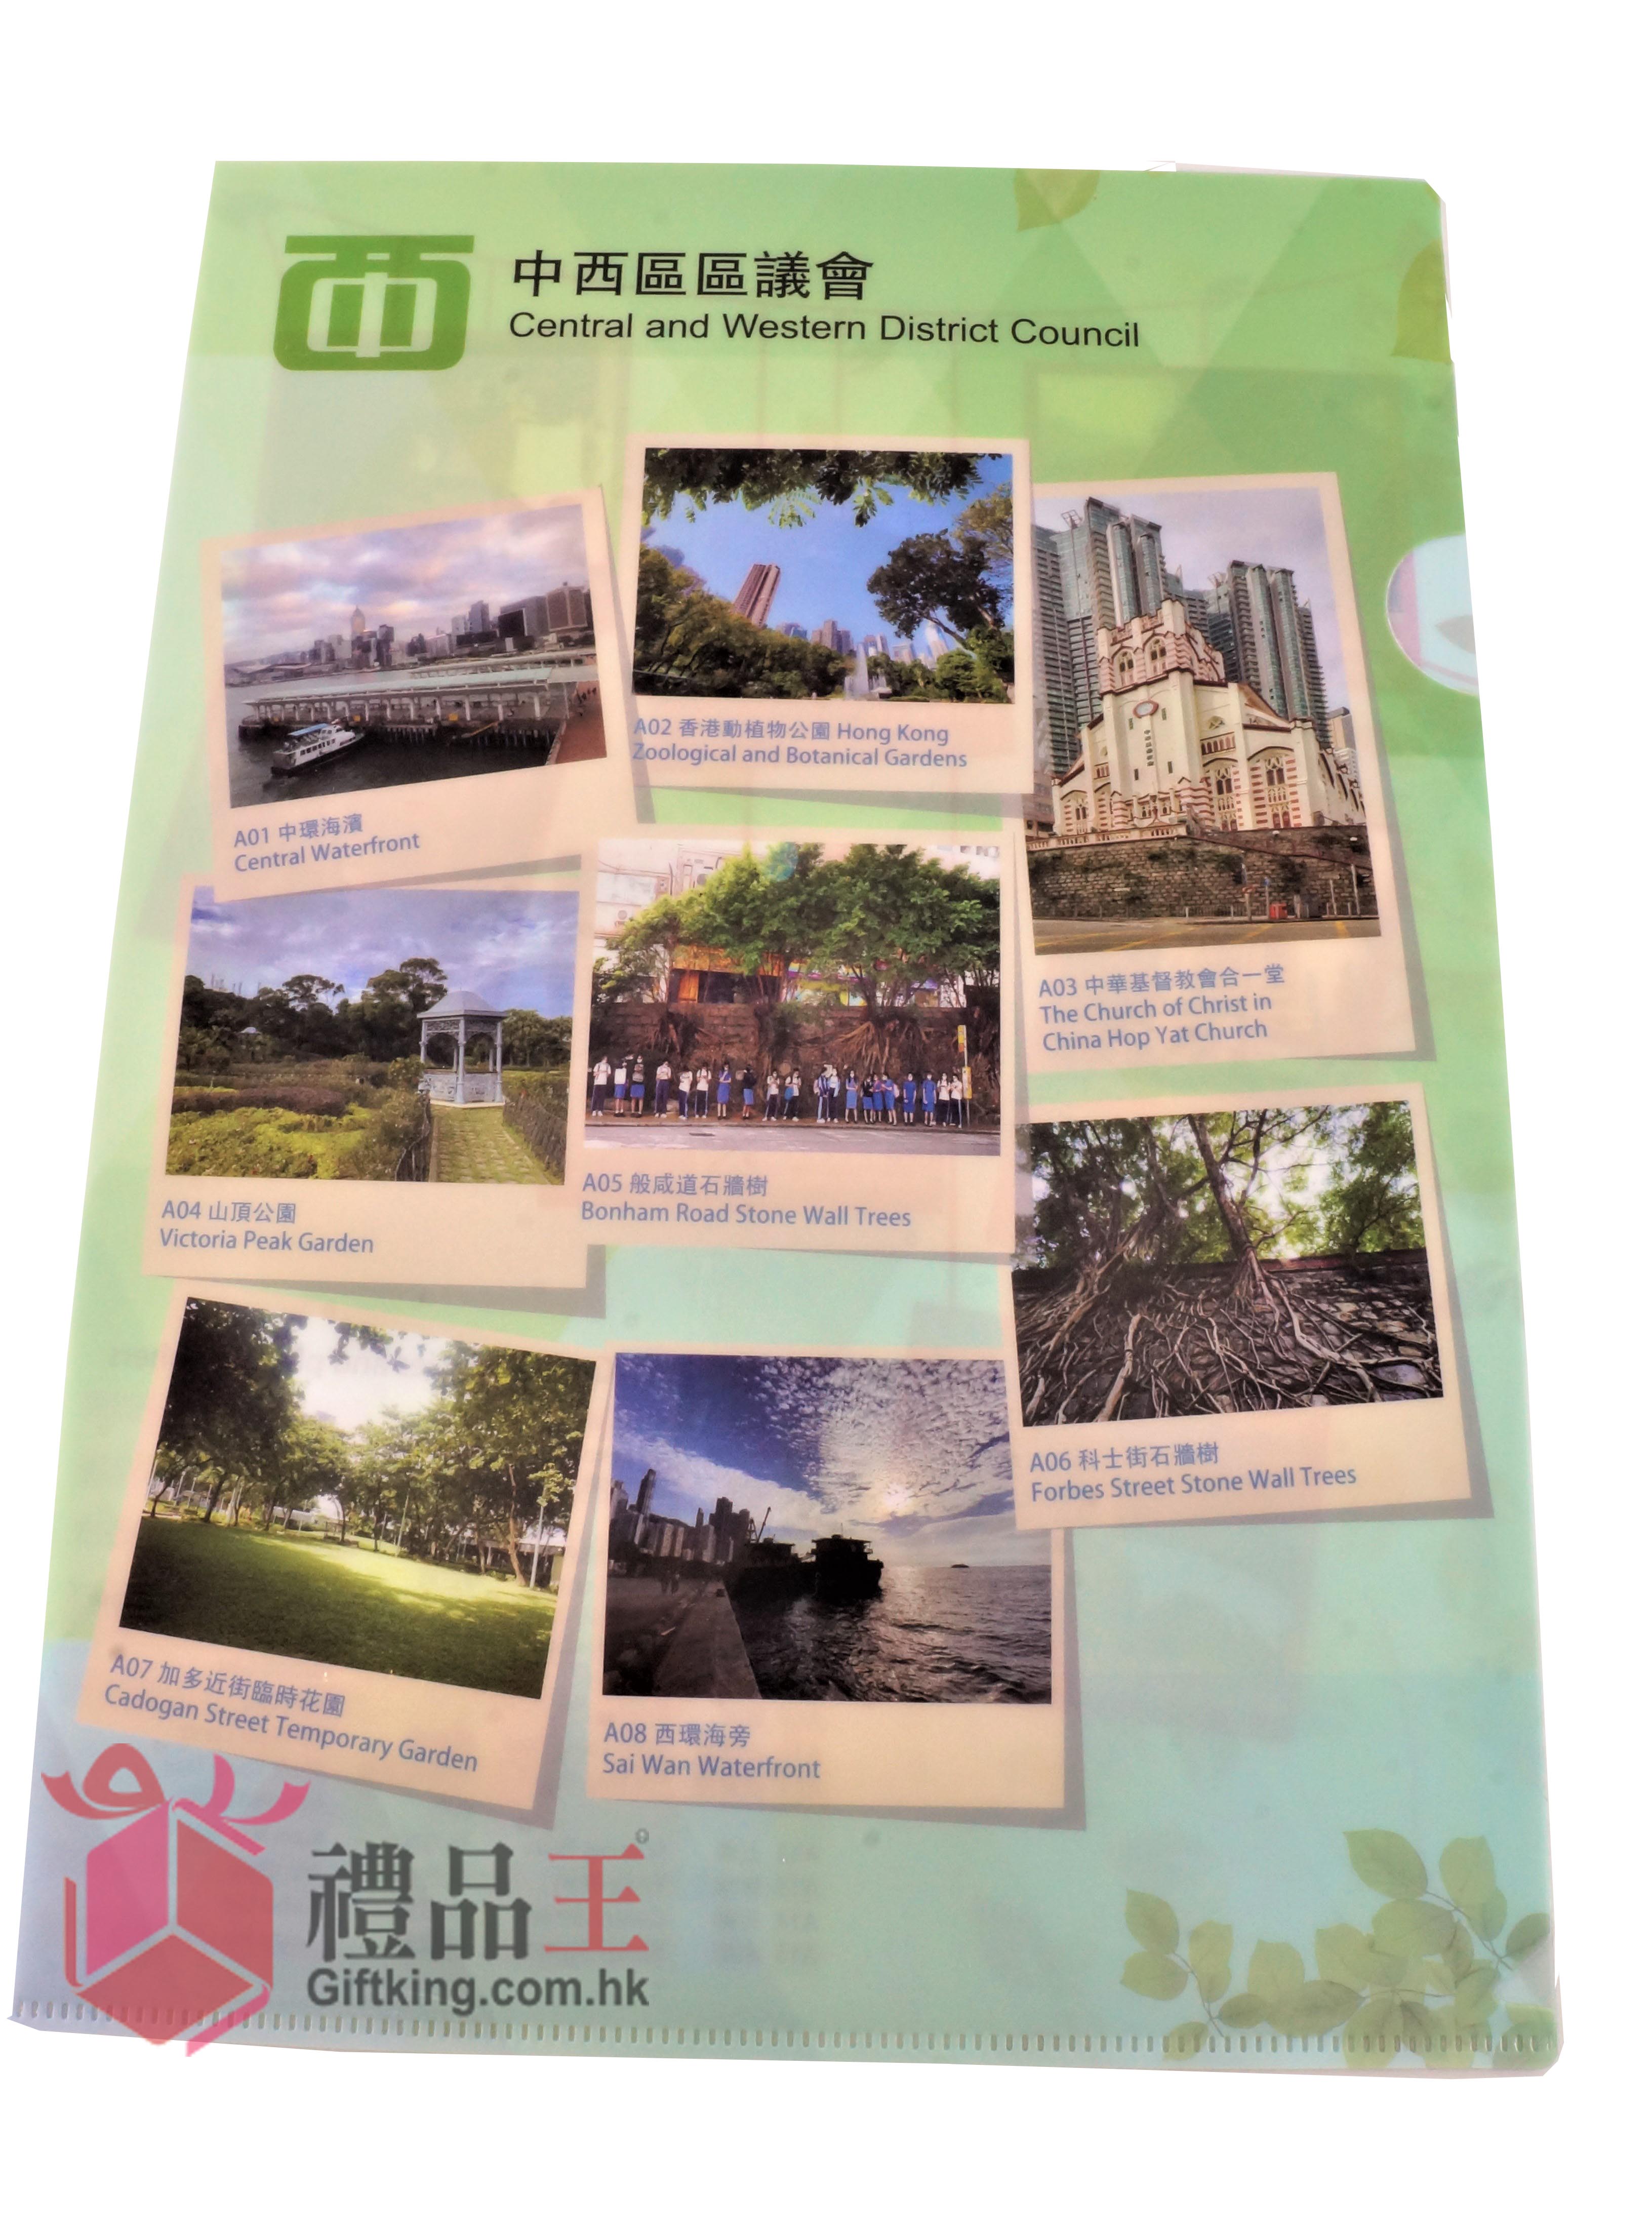 Central and Western District Council View Cover Designed A4 File (Stationery Gift)